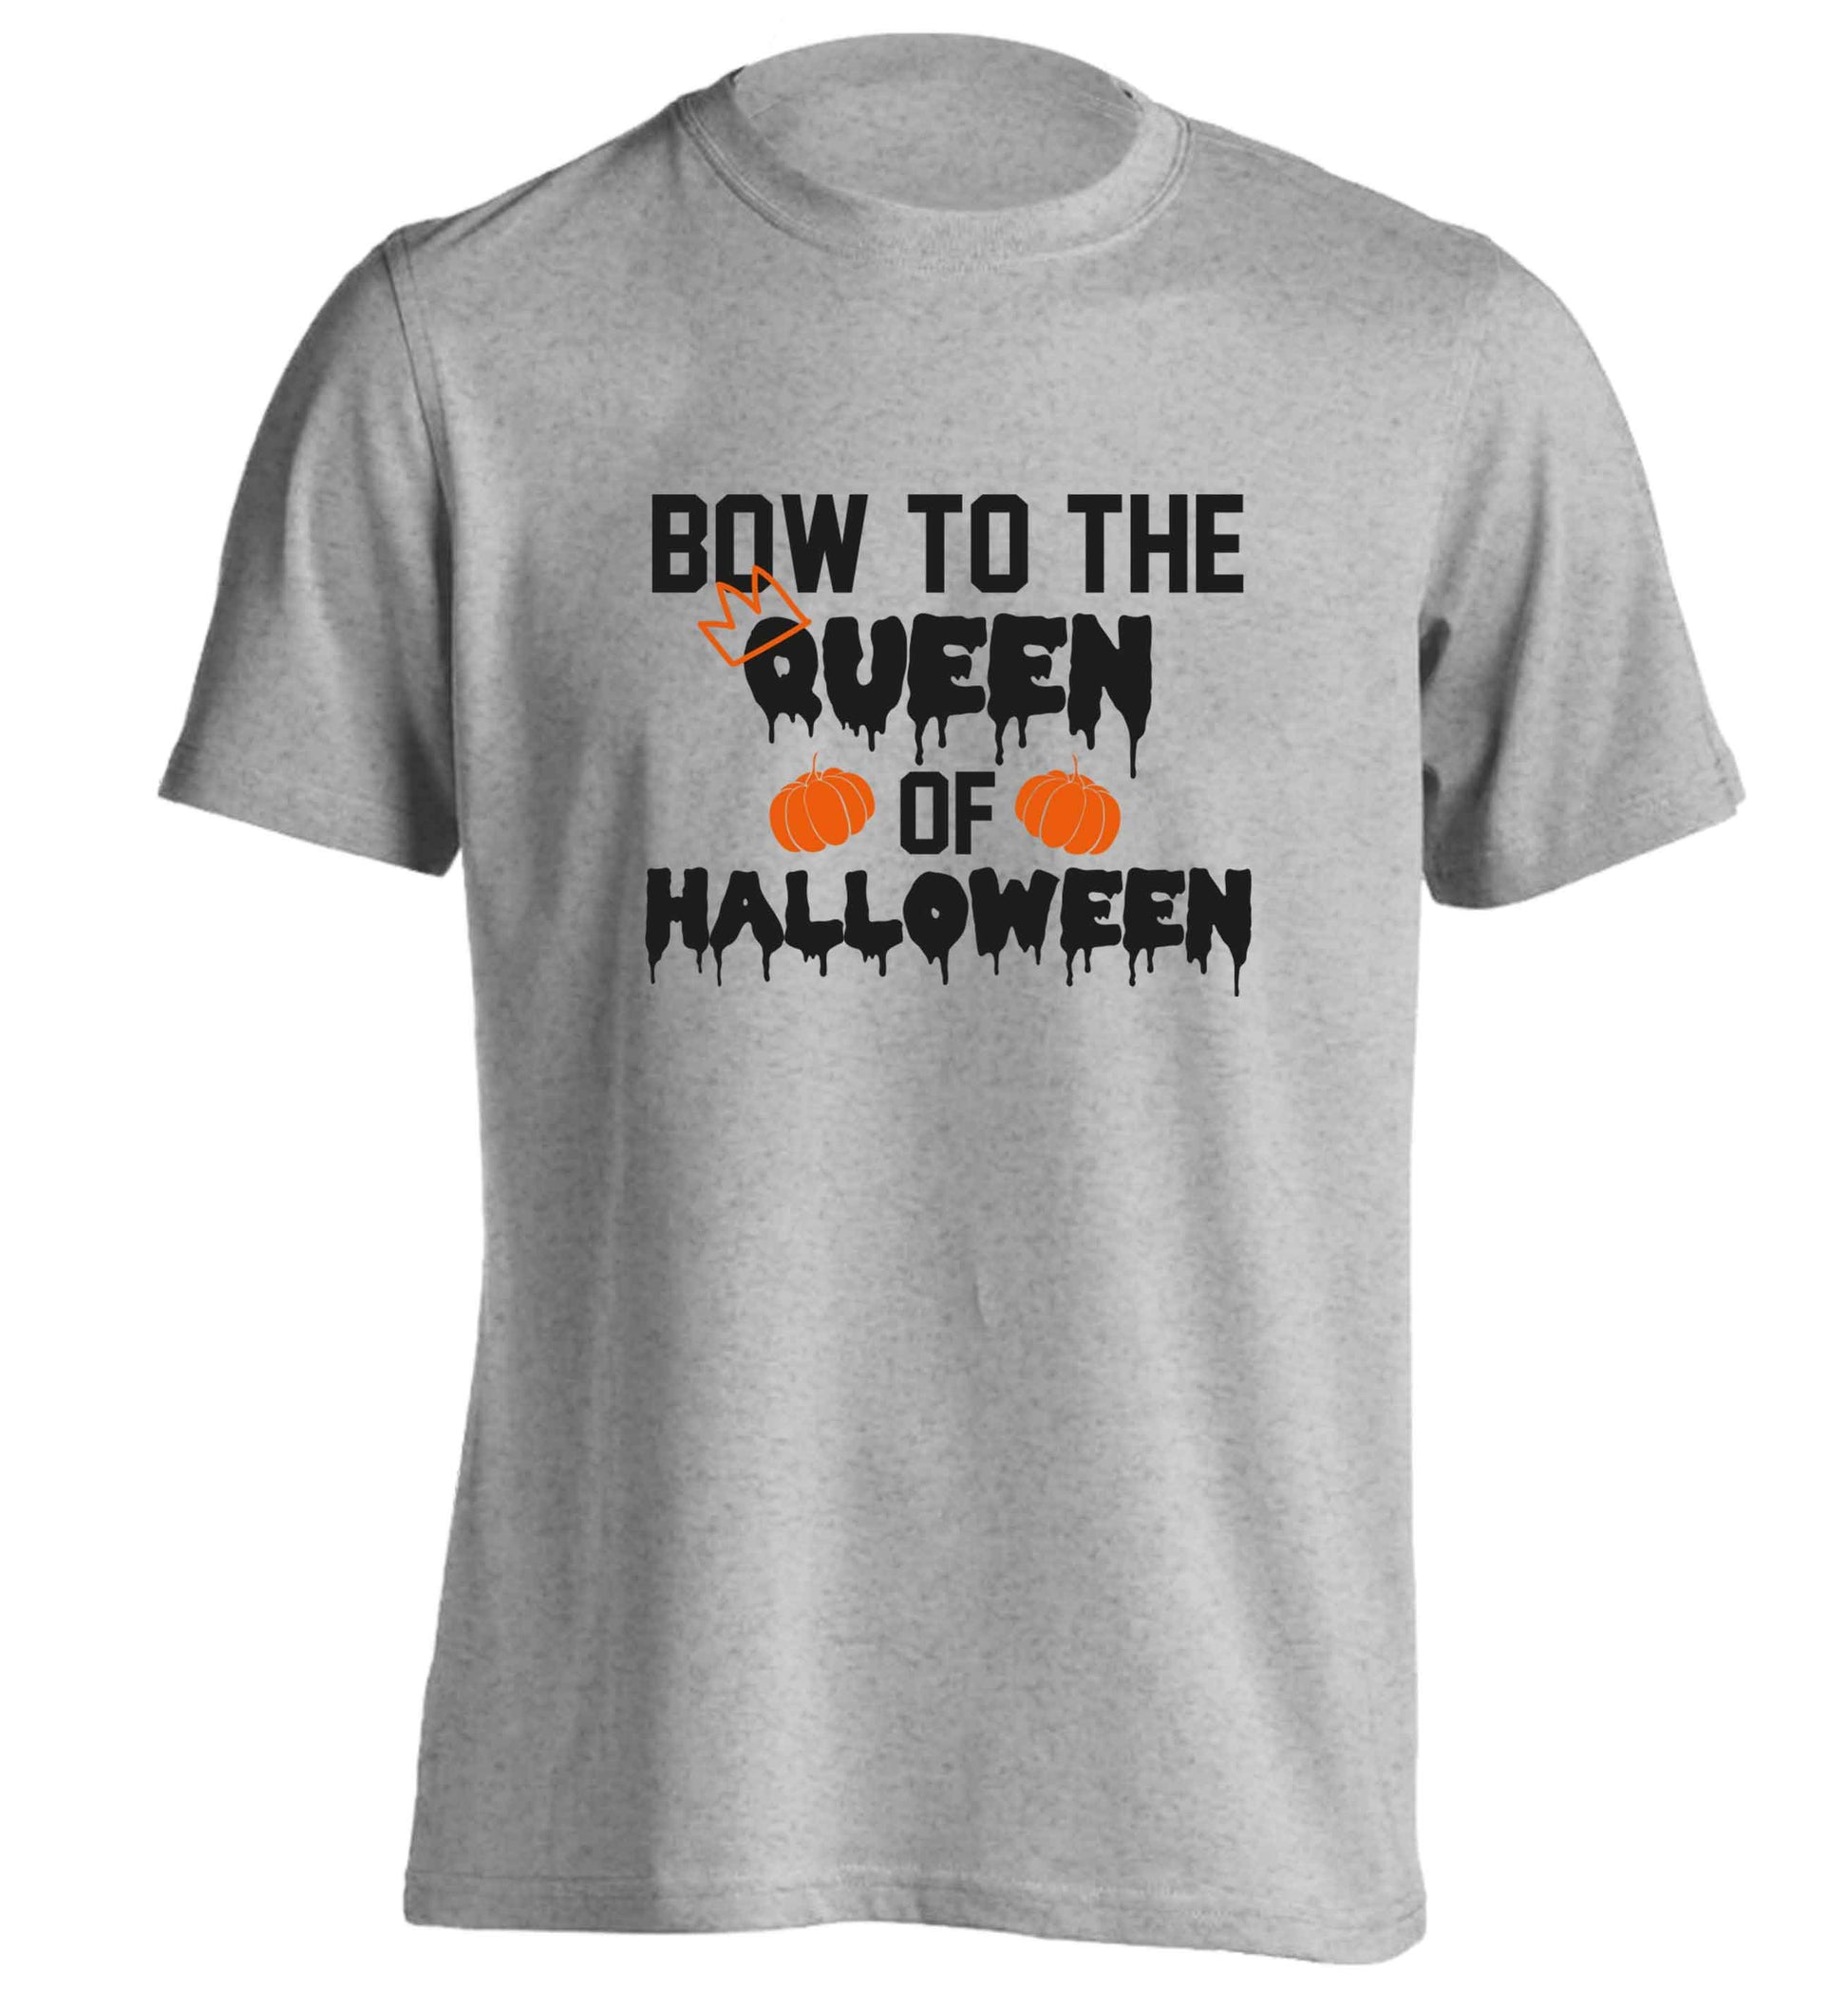 Bow to the Queen of halloween adults unisex grey Tshirt 2XL